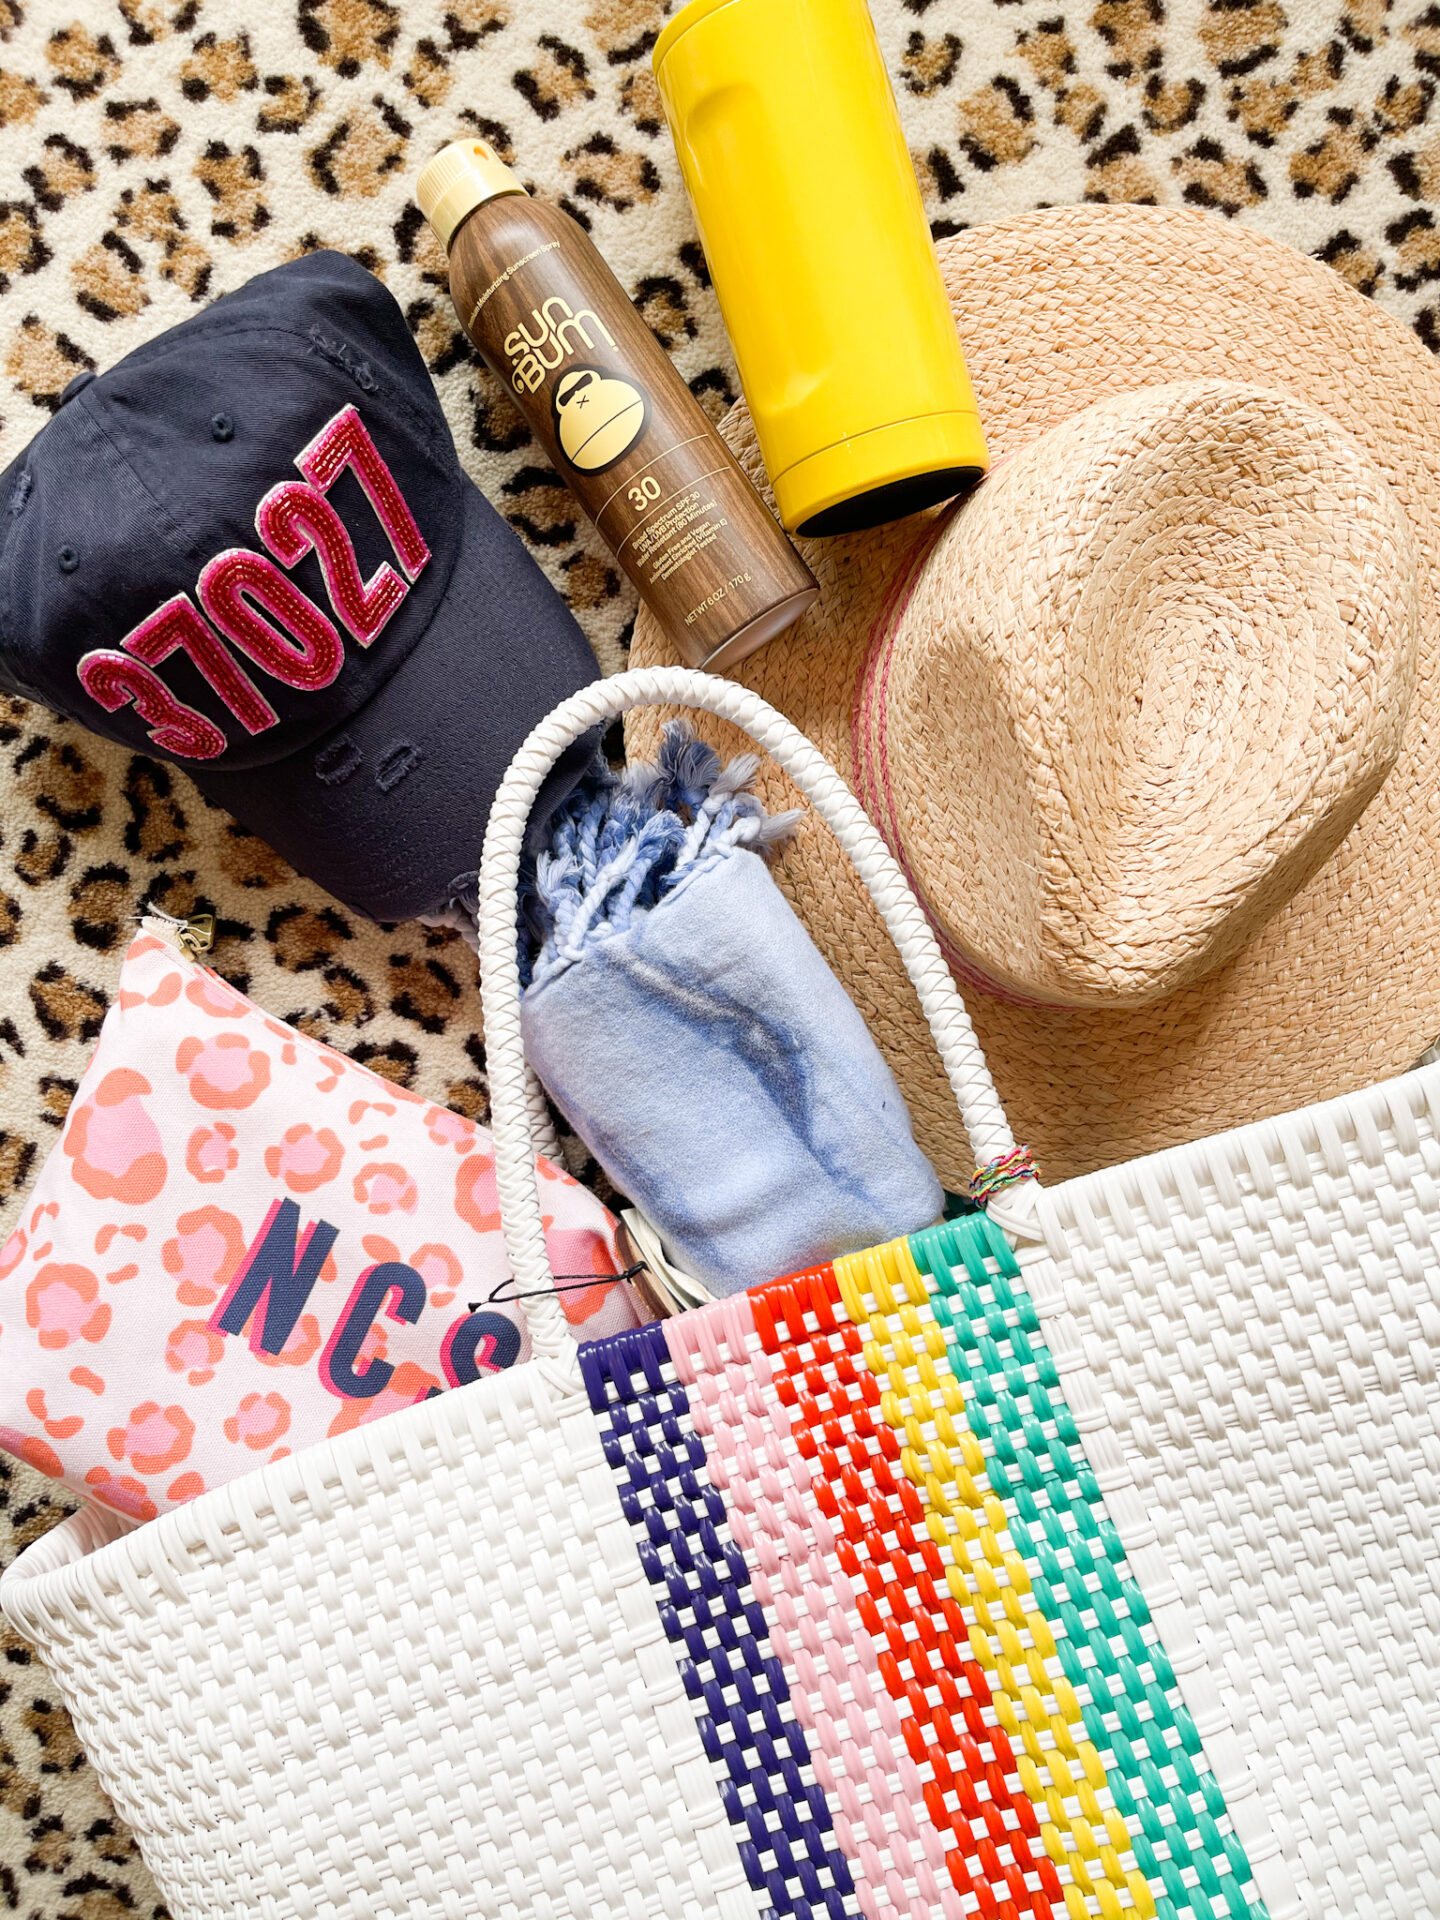 Spring Break Outfits by popular Nashville fashion blog, Hello Happiness: image of a white woven tote bag next to a straw sun hat, blue baseball cap, sun Bum sunscreen, and a personalize cosmetic tote. 